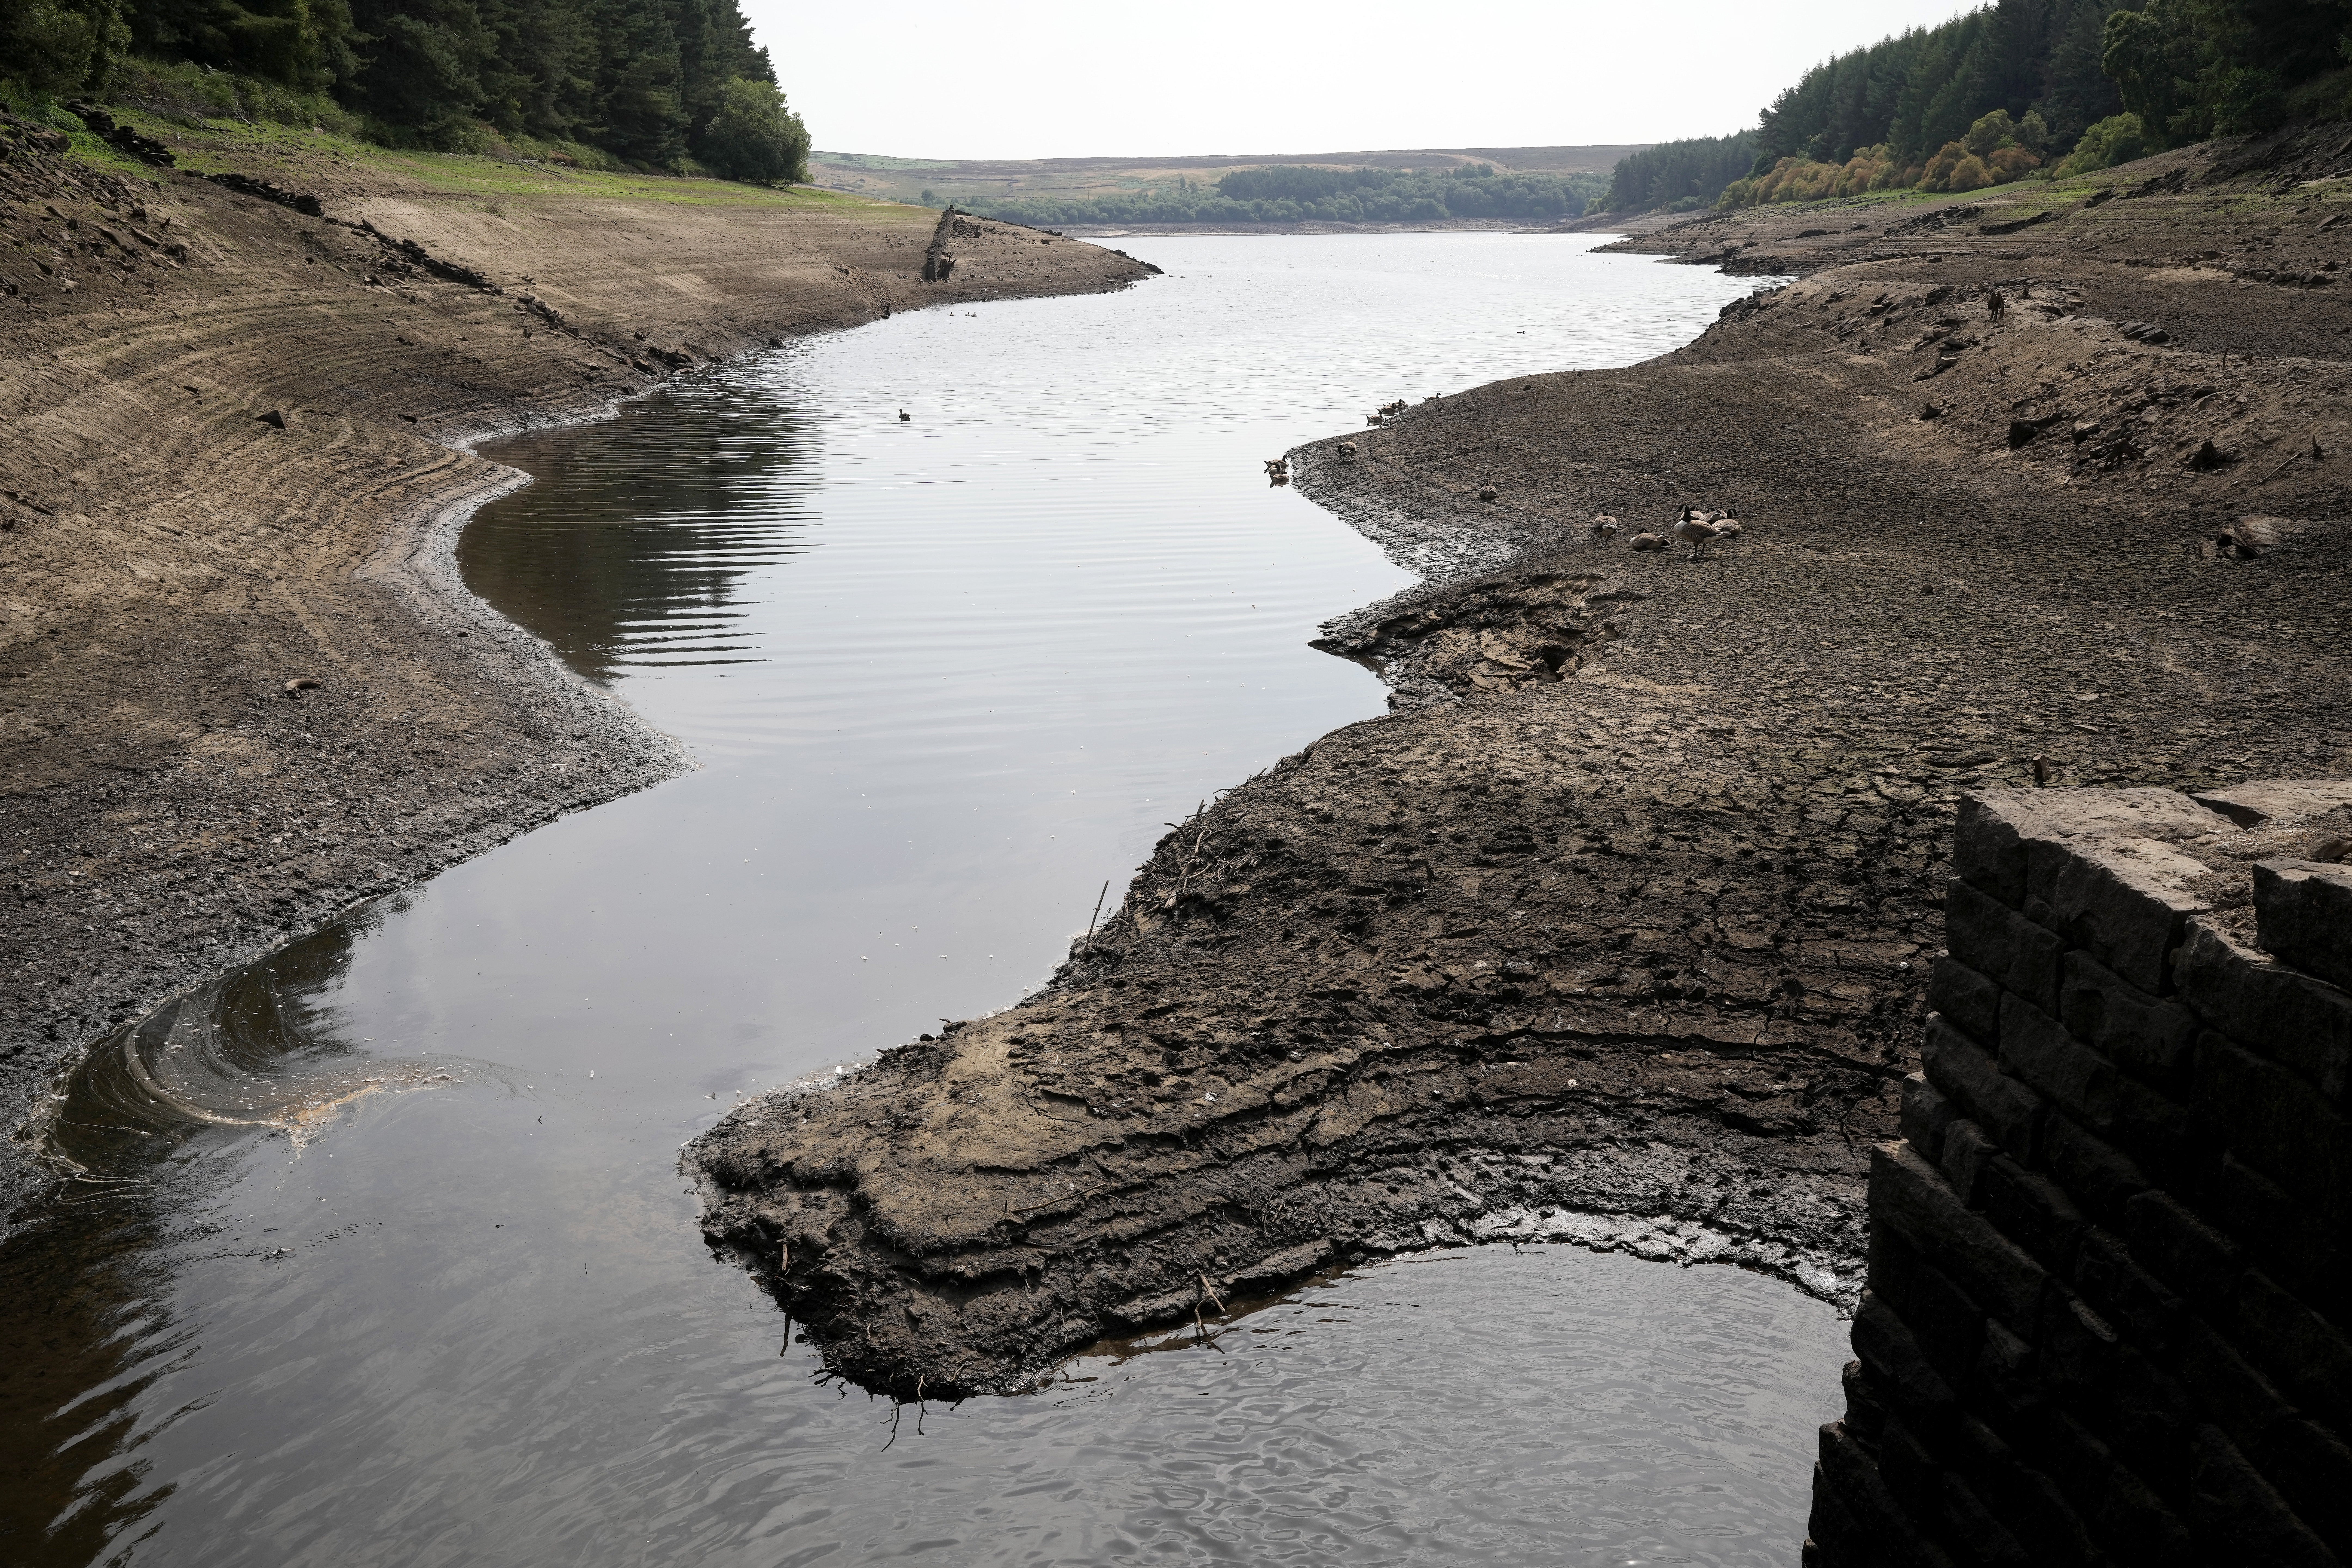 The Thruscross reservoir was left partially depleted in the heatwave